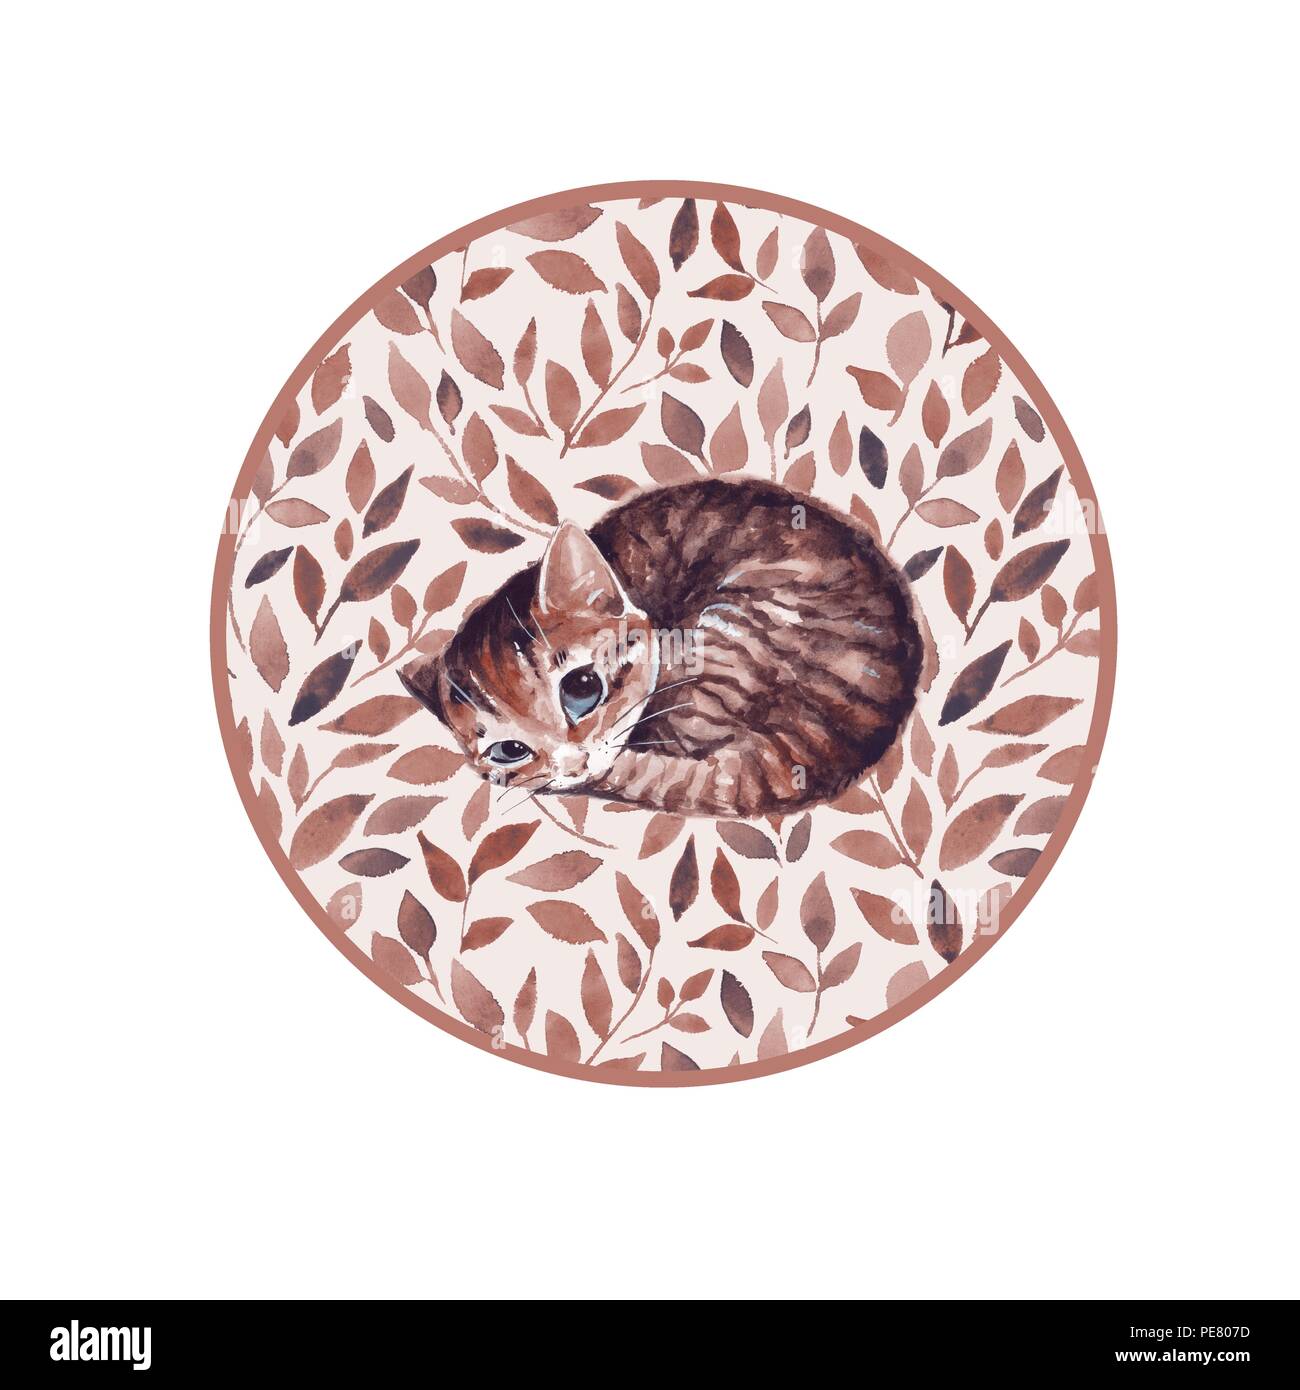 Sleepy cat. Cute watercolor illustration with kitten. Circle floral background Stock Photo